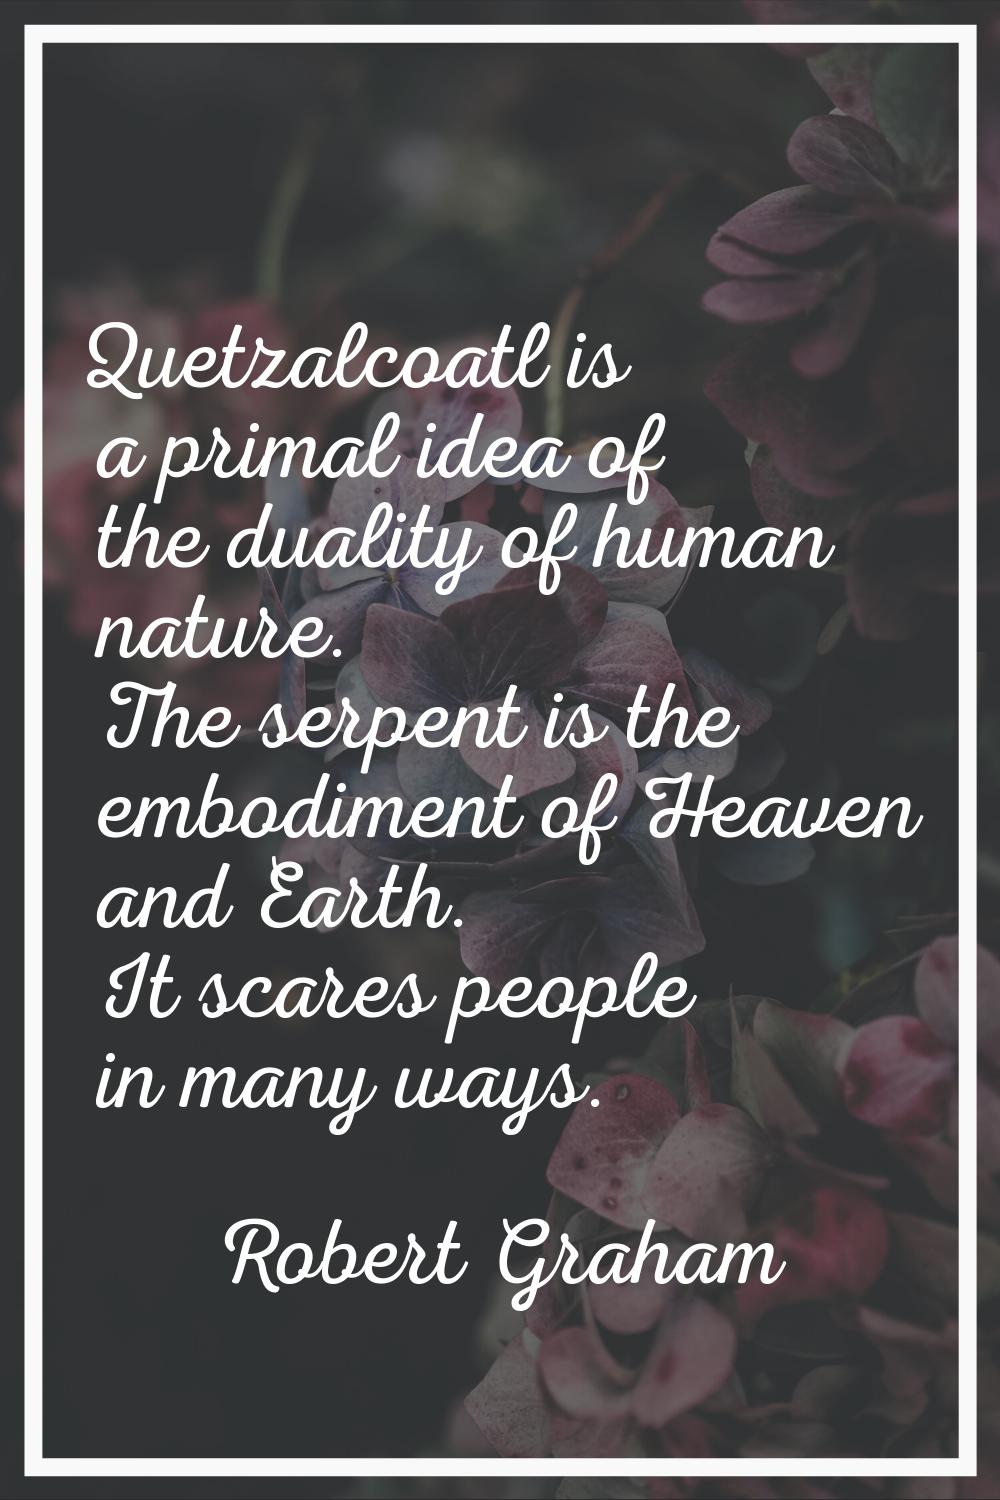 Quetzalcoatl is a primal idea of the duality of human nature. The serpent is the embodiment of Heav